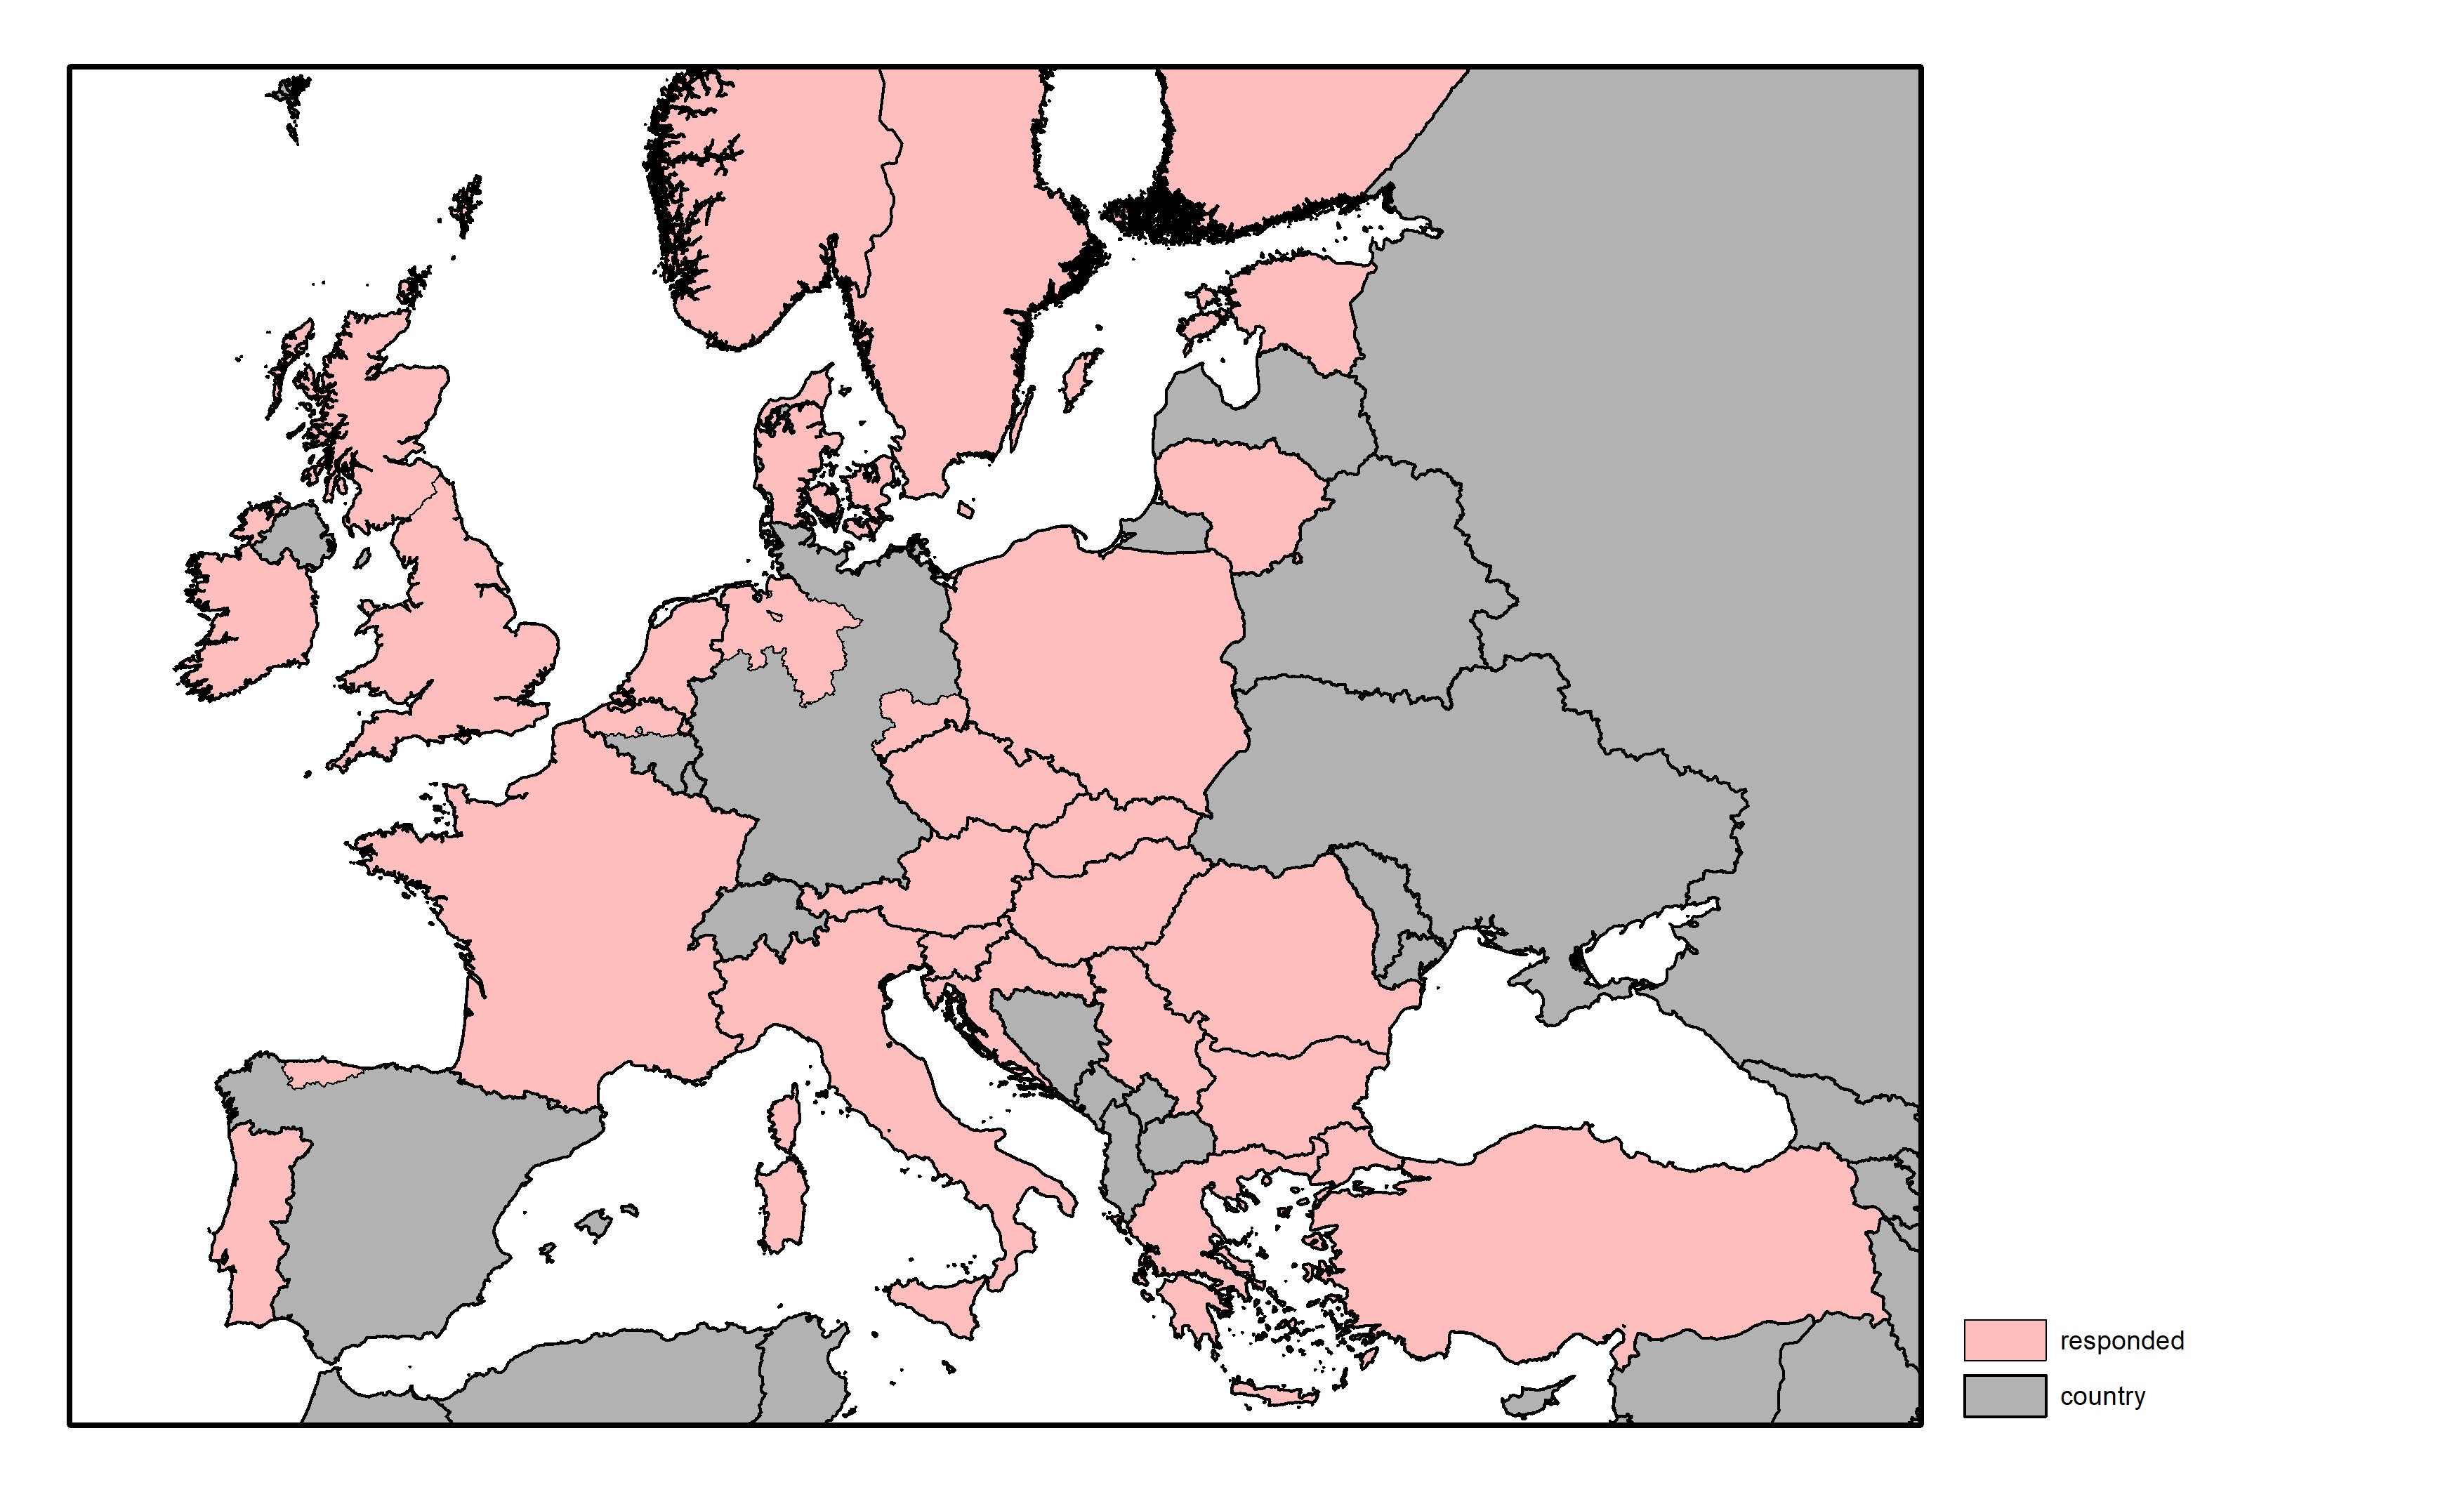 A map of Europe showing countries or regions in color that have responded to a survey